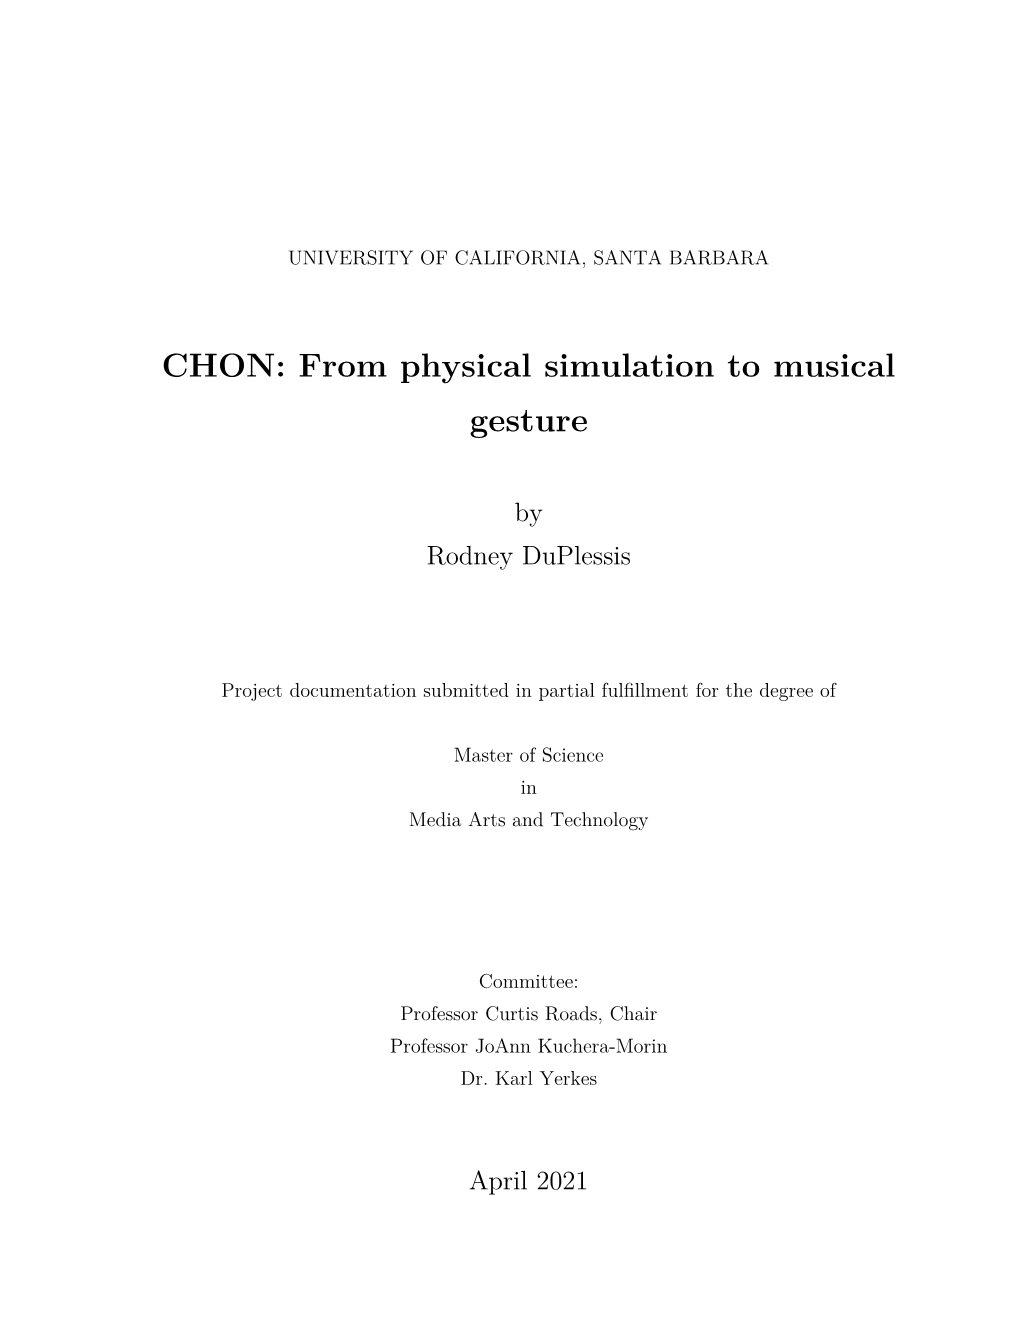 CHON: from Physical Simulation to Musical Gesture